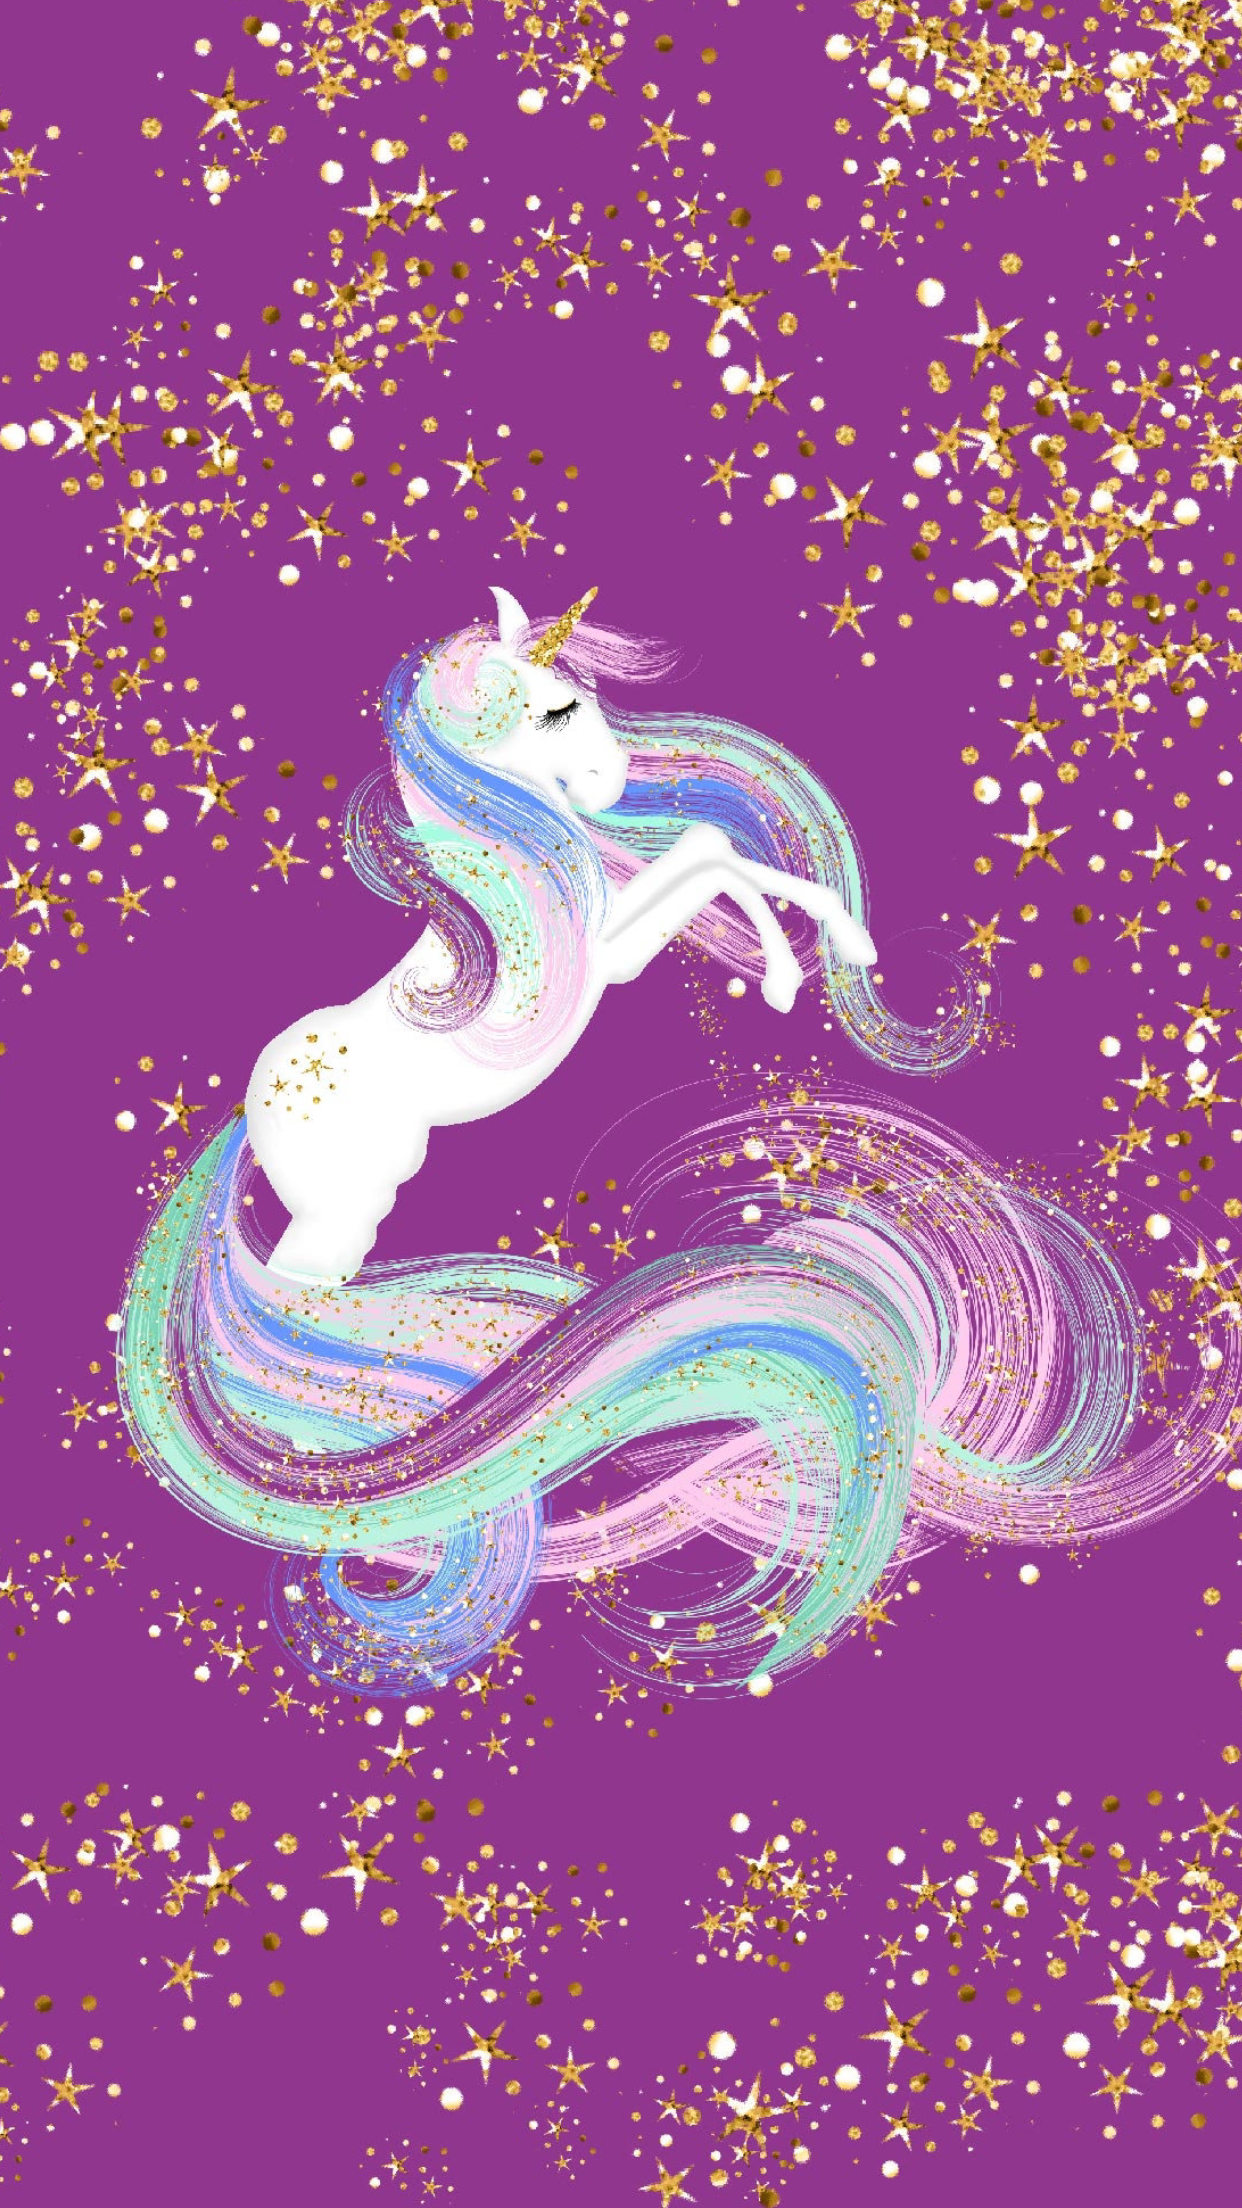 Wallpaper. Unicorn wallpaper, Unicorn art, Unicorn picture